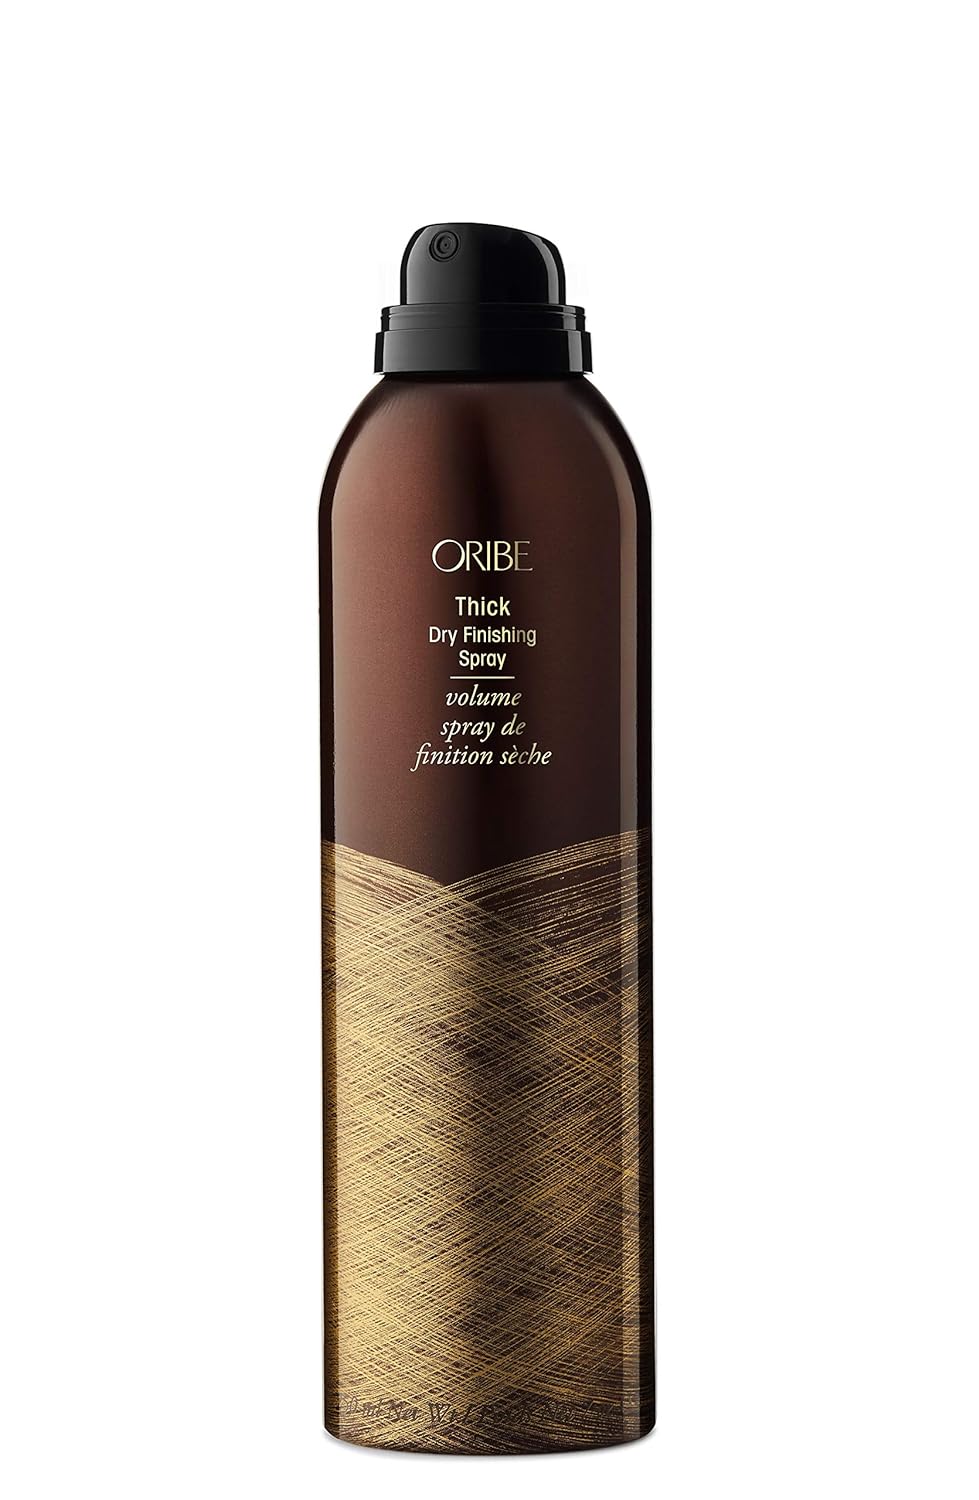 Oribe Thick Dry Finishing Spray, 7 oz : Beauty & Personal Care